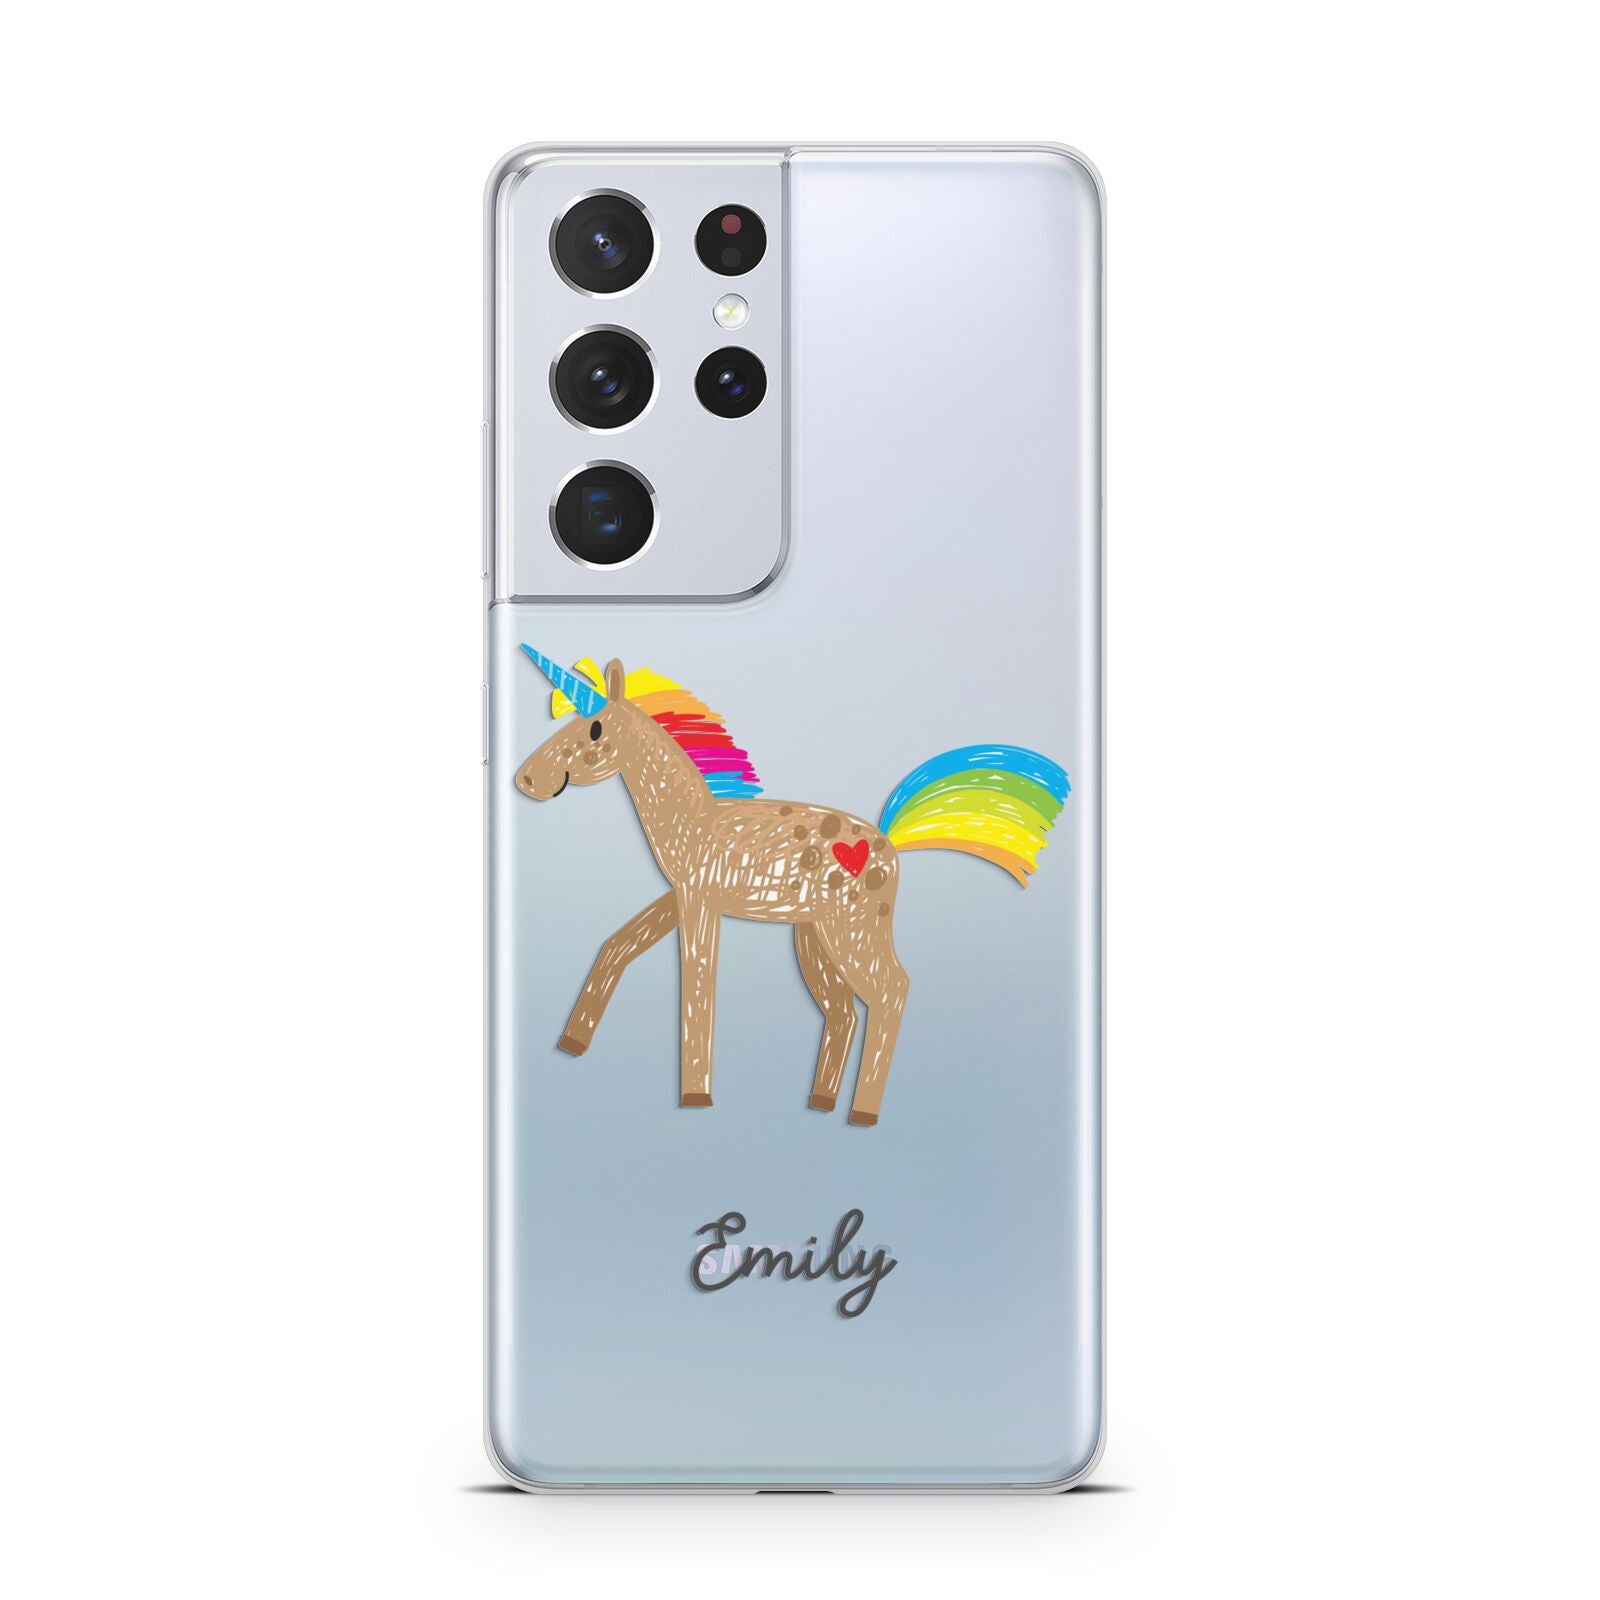 Personalised Unicorn with Name Samsung S21 Ultra Case